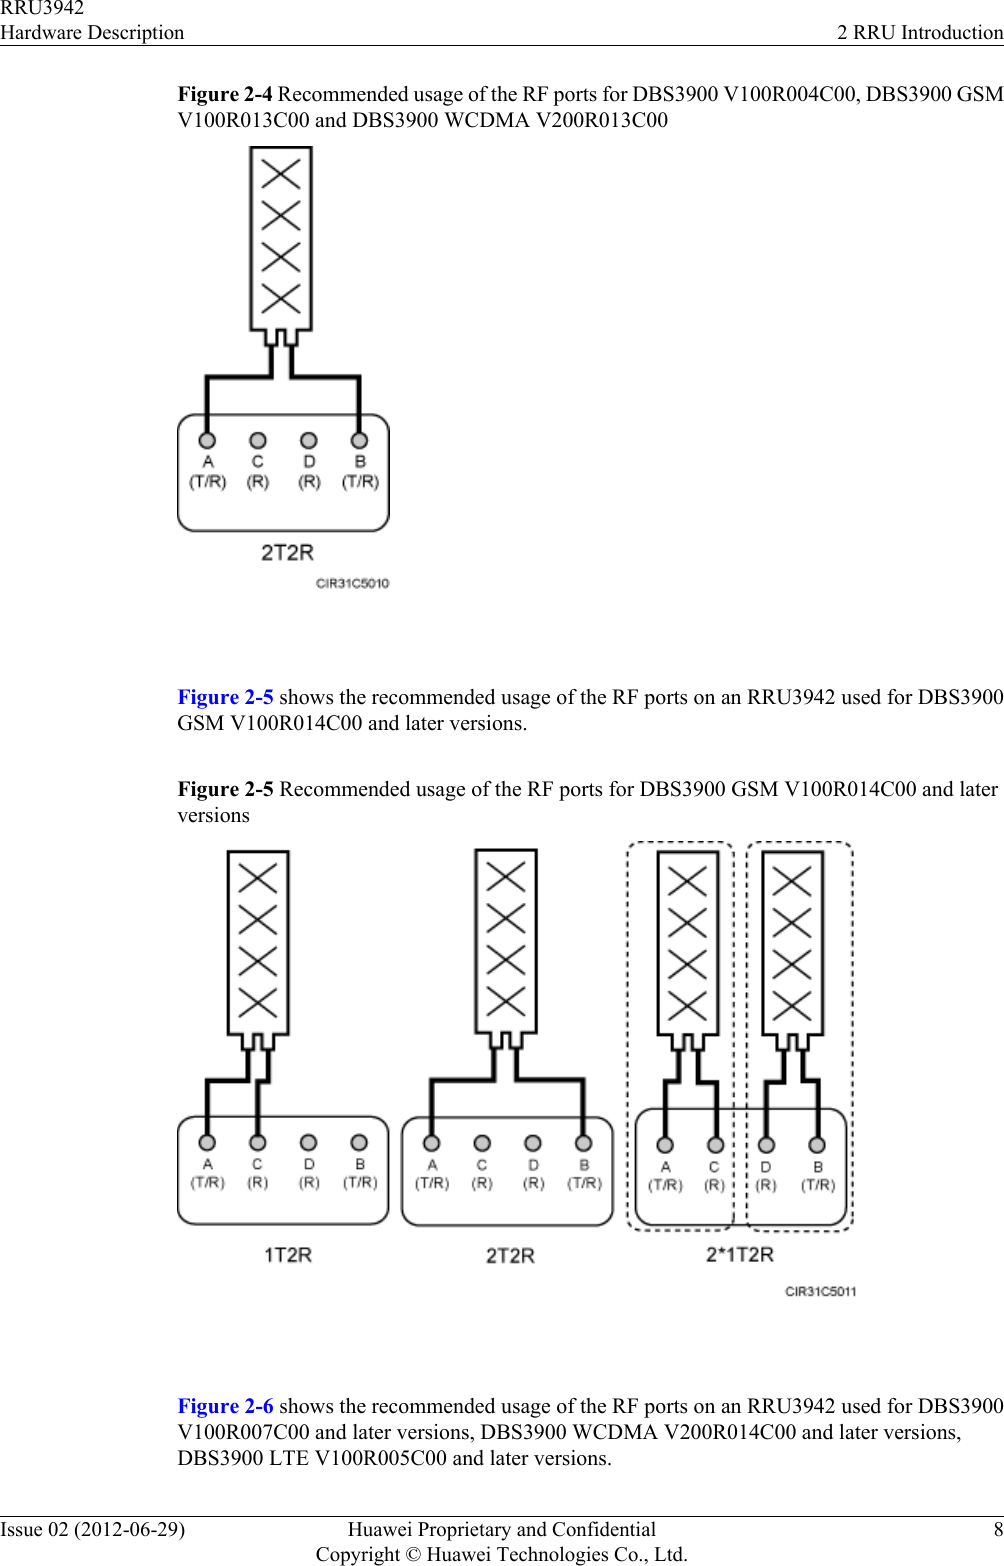 Figure 2-4 Recommended usage of the RF ports for DBS3900 V100R004C00, DBS3900 GSMV100R013C00 and DBS3900 WCDMA V200R013C00 Figure 2-5 shows the recommended usage of the RF ports on an RRU3942 used for DBS3900GSM V100R014C00 and later versions.Figure 2-5 Recommended usage of the RF ports for DBS3900 GSM V100R014C00 and laterversions Figure 2-6 shows the recommended usage of the RF ports on an RRU3942 used for DBS3900V100R007C00 and later versions, DBS3900 WCDMA V200R014C00 and later versions,DBS3900 LTE V100R005C00 and later versions.RRU3942Hardware Description 2 RRU IntroductionIssue 02 (2012-06-29) Huawei Proprietary and ConfidentialCopyright © Huawei Technologies Co., Ltd.8